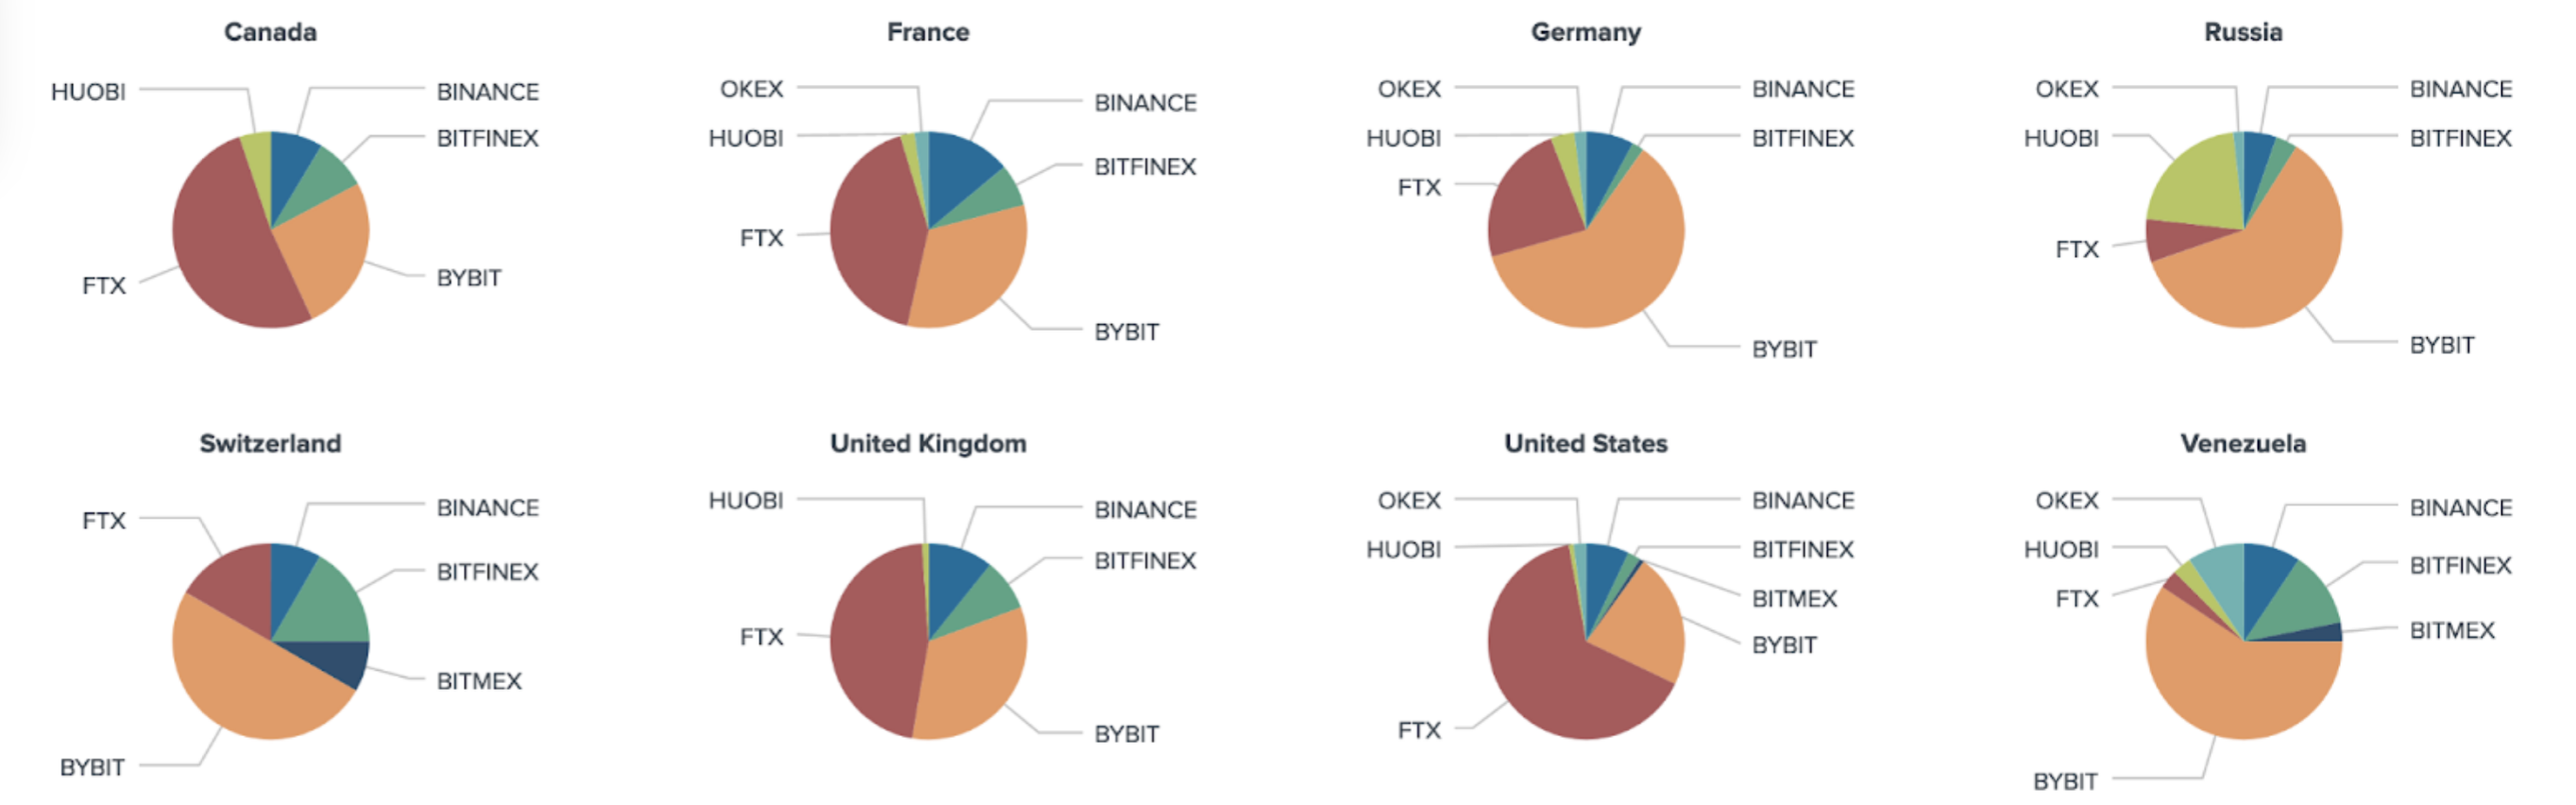 Exchange distribution of the identified derivatives traders by country